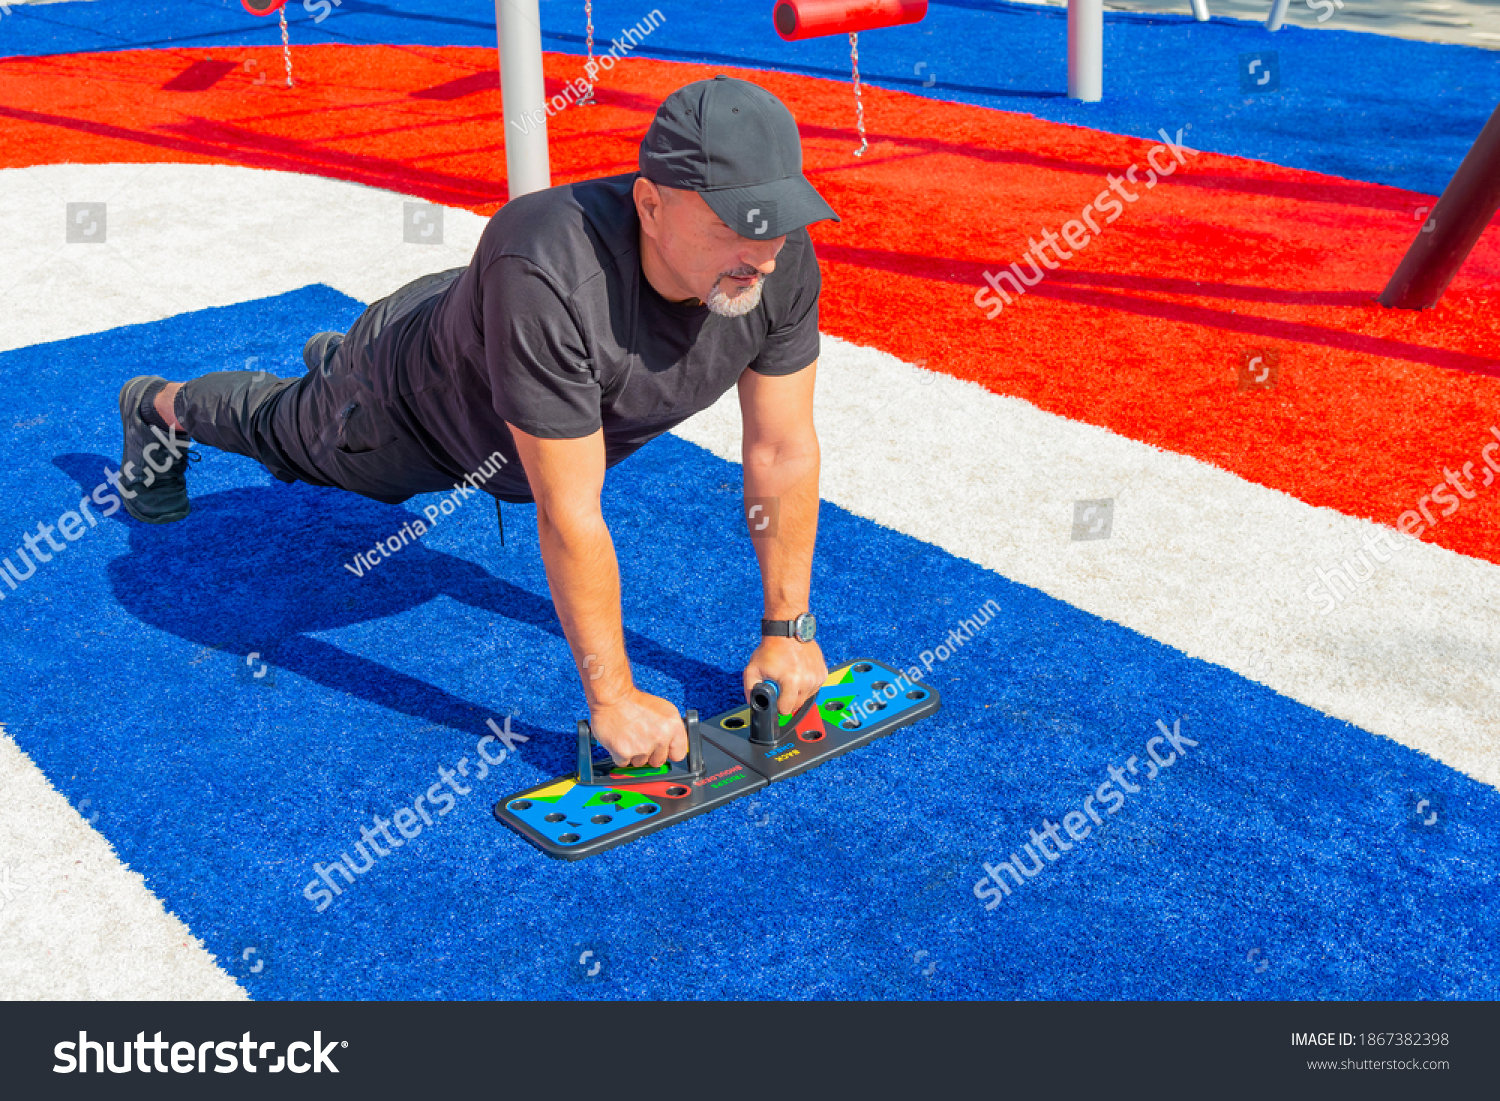 Athletic man doing push-ups on a push-up board at the sports field in the city park. #1867382398